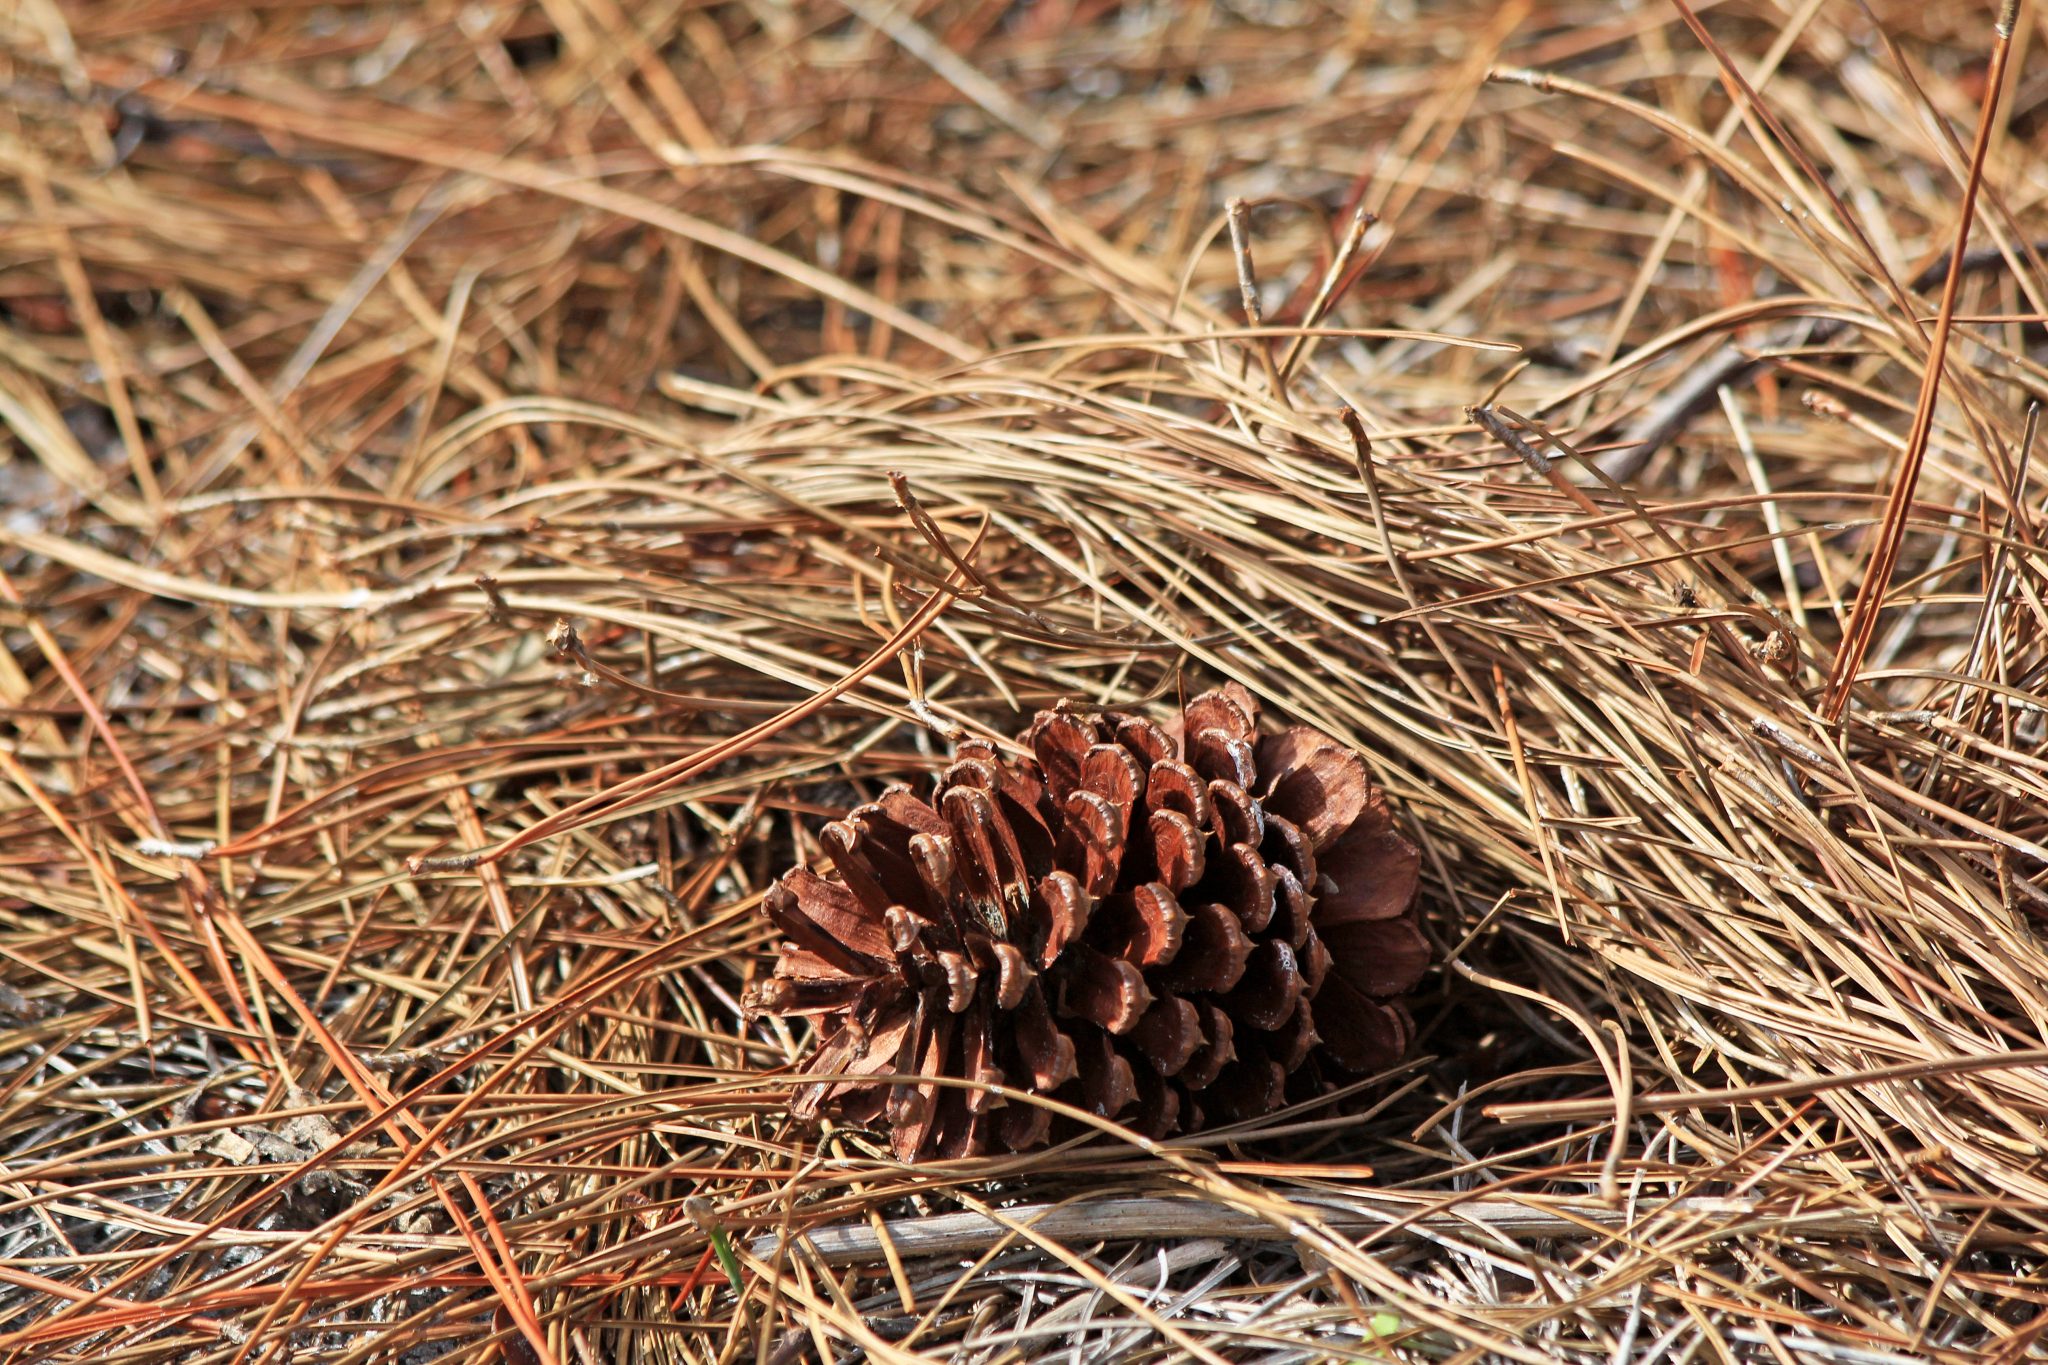 A pine cone laying on pine straw.